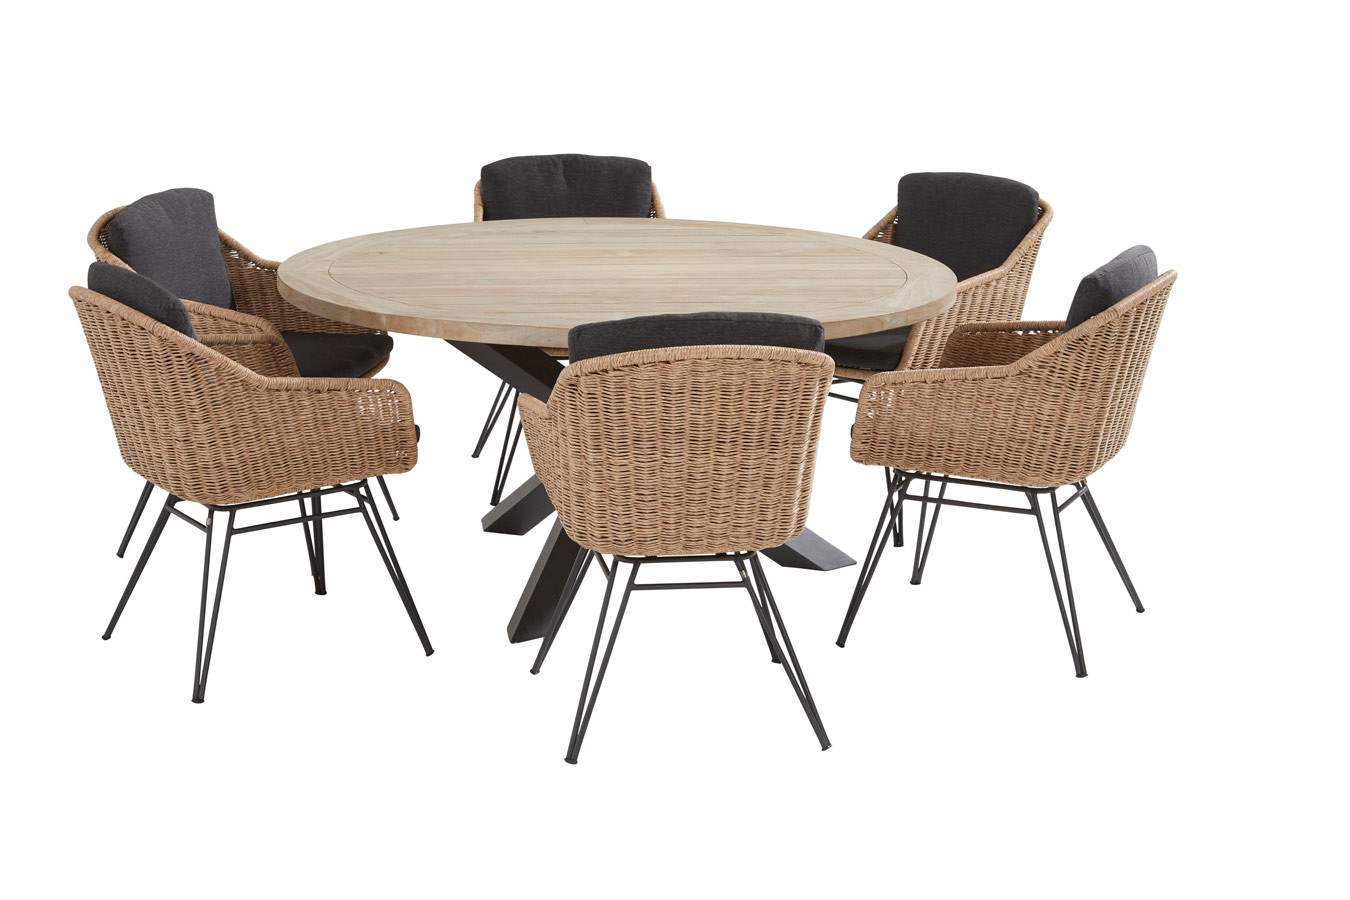 Bohemian natural dining set with round Louvre table 160 cm